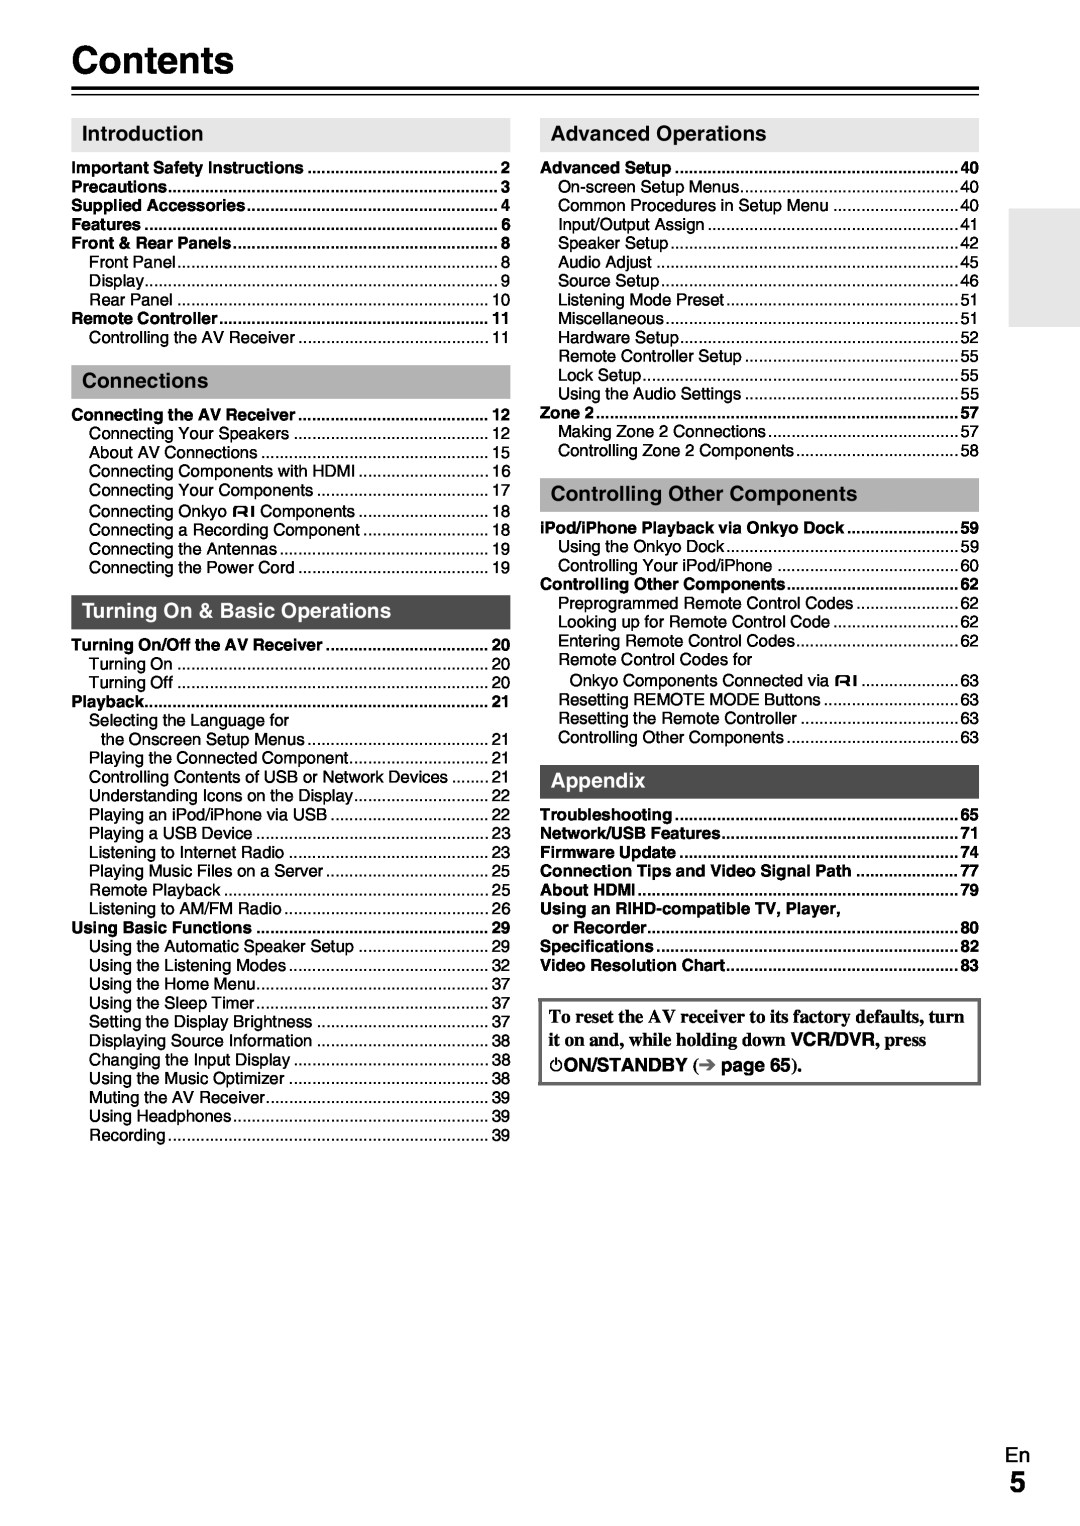 Onkyo HT-RC360 instruction manual Contents, Turning On & Basic Operations, Appendix, 8ON/STANDBY page 